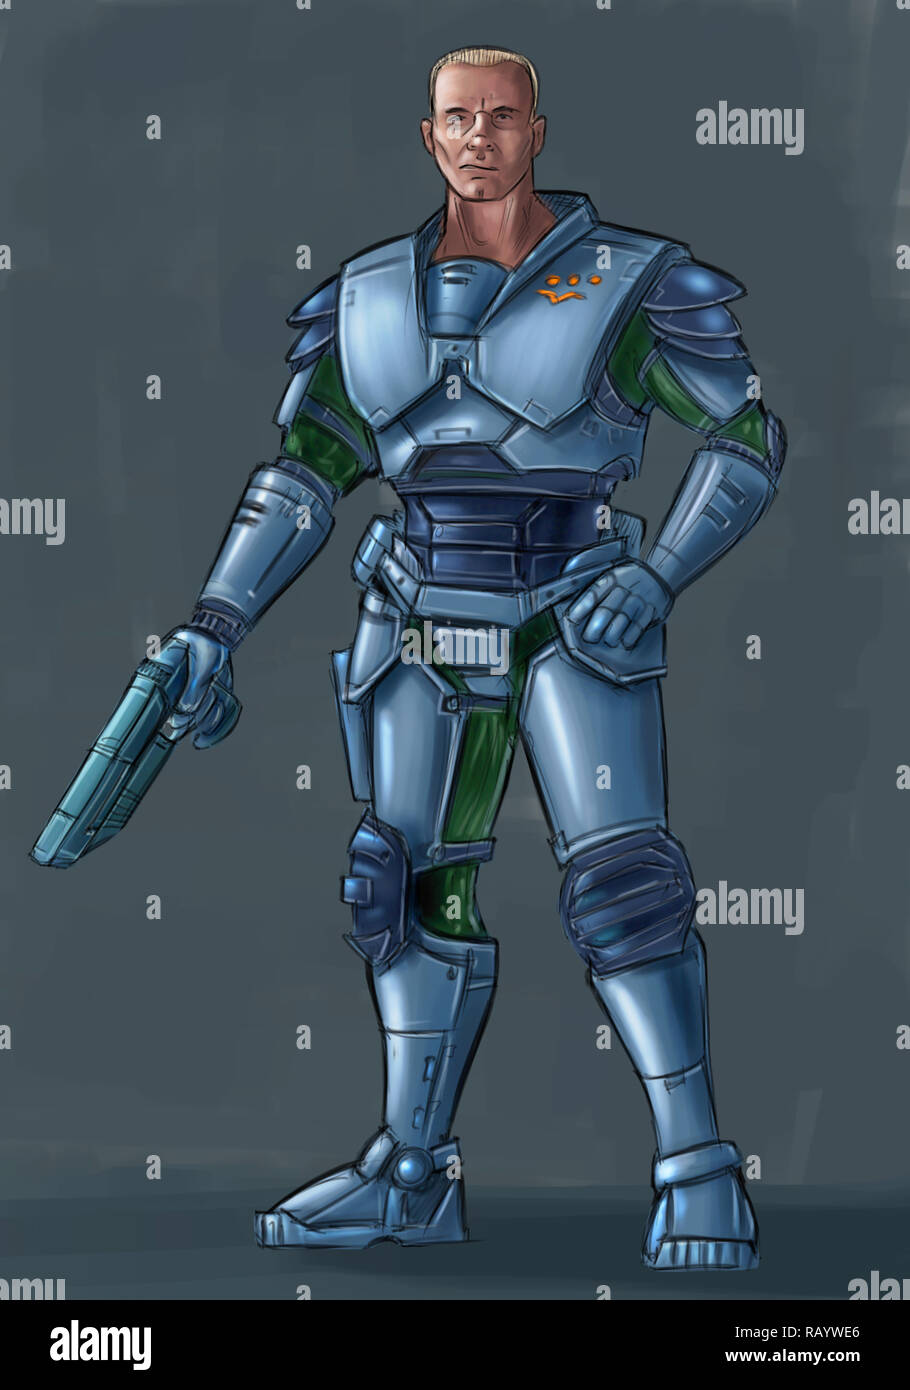 Concept Art Science Fiction Illustration of Futuristic Soldier Character in Armor With Gun Stock Photo